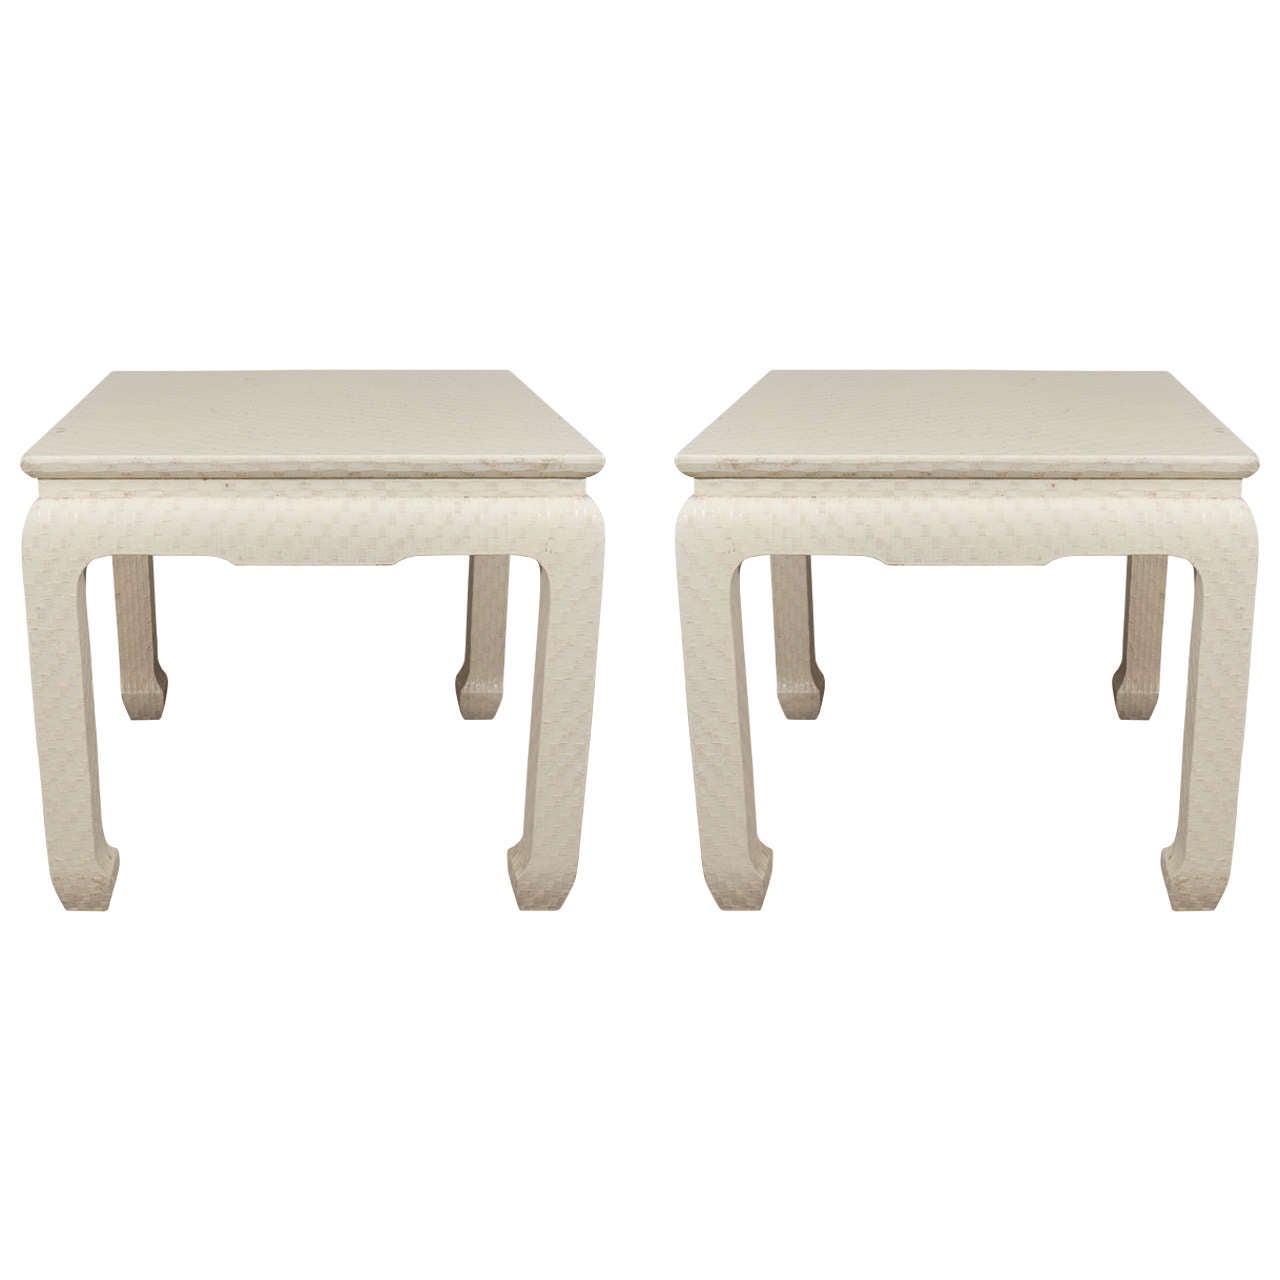 Pair of Baker Side Tables in Lacquered Grasscloth